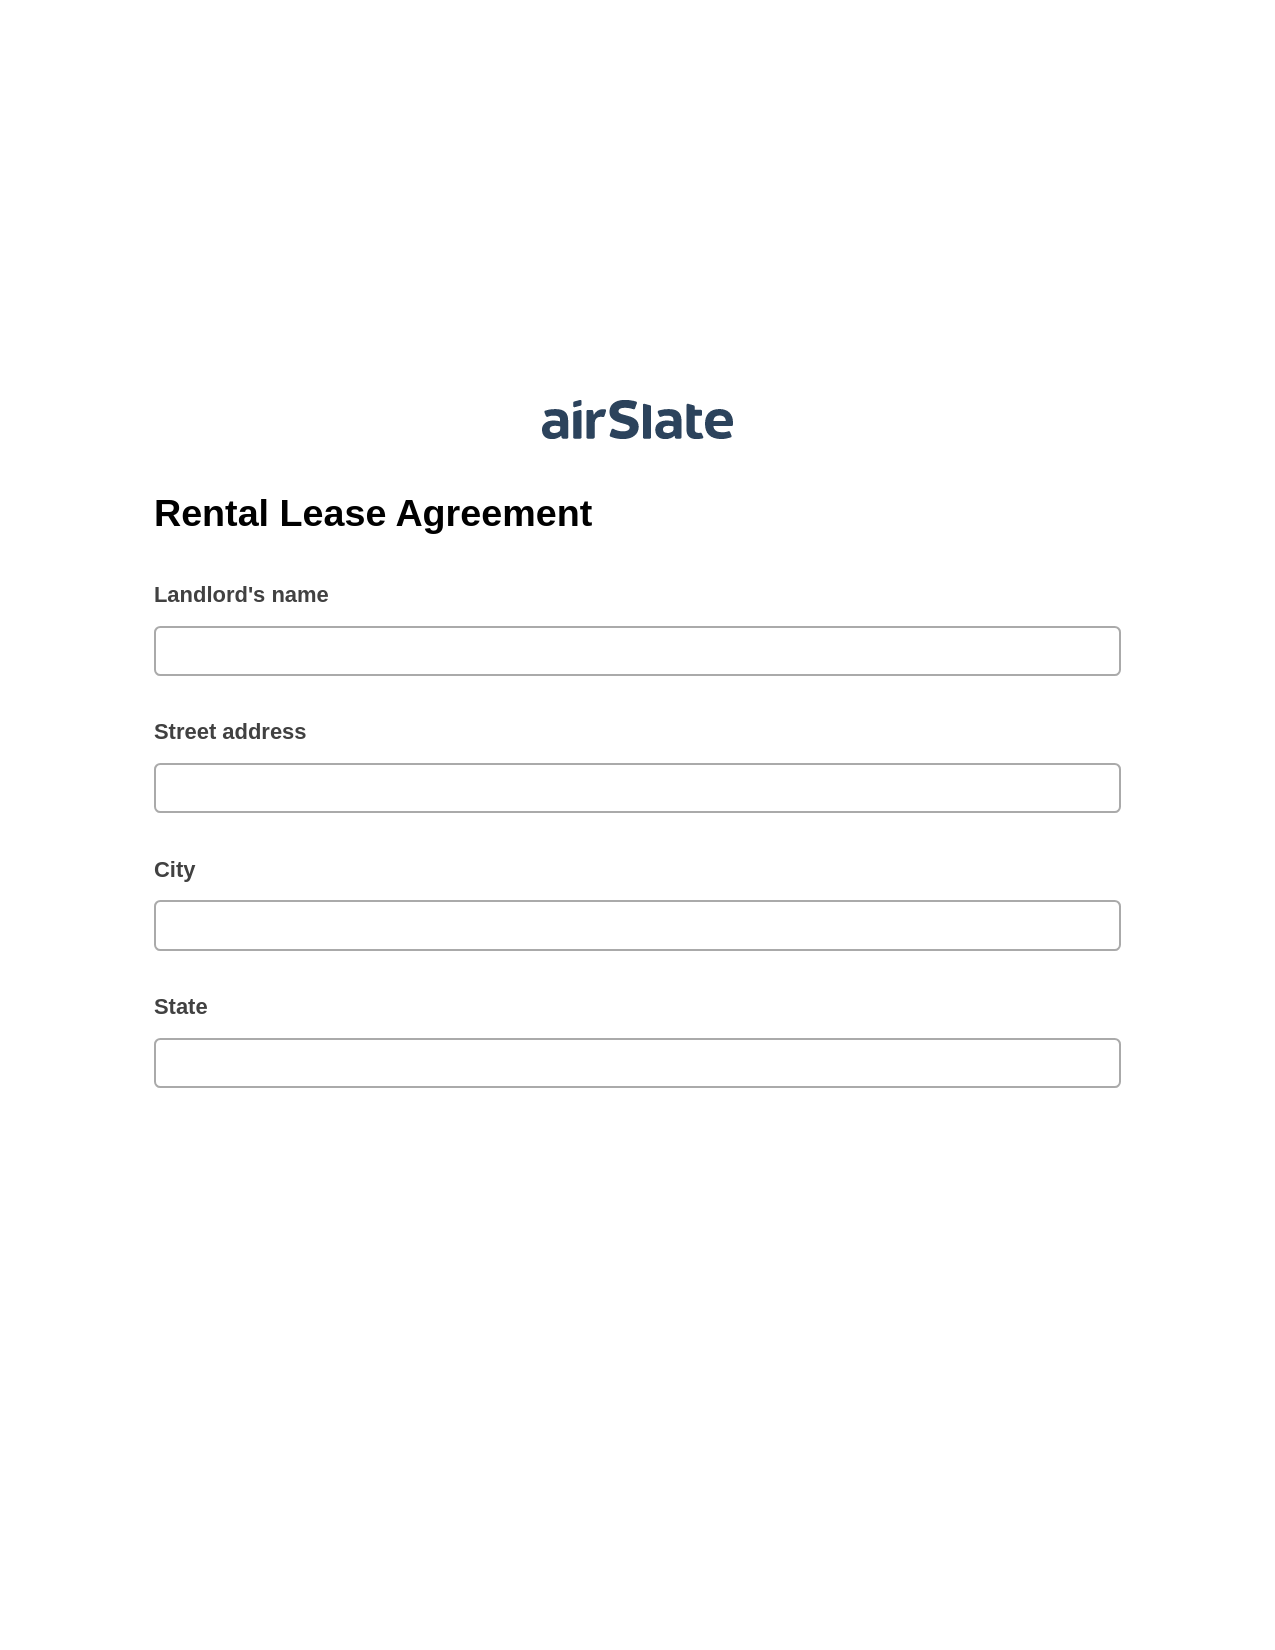 Multirole Rental Lease Agreement Pre-fill from another Slate Bot, Update NetSuite Records Bot, Box Bot